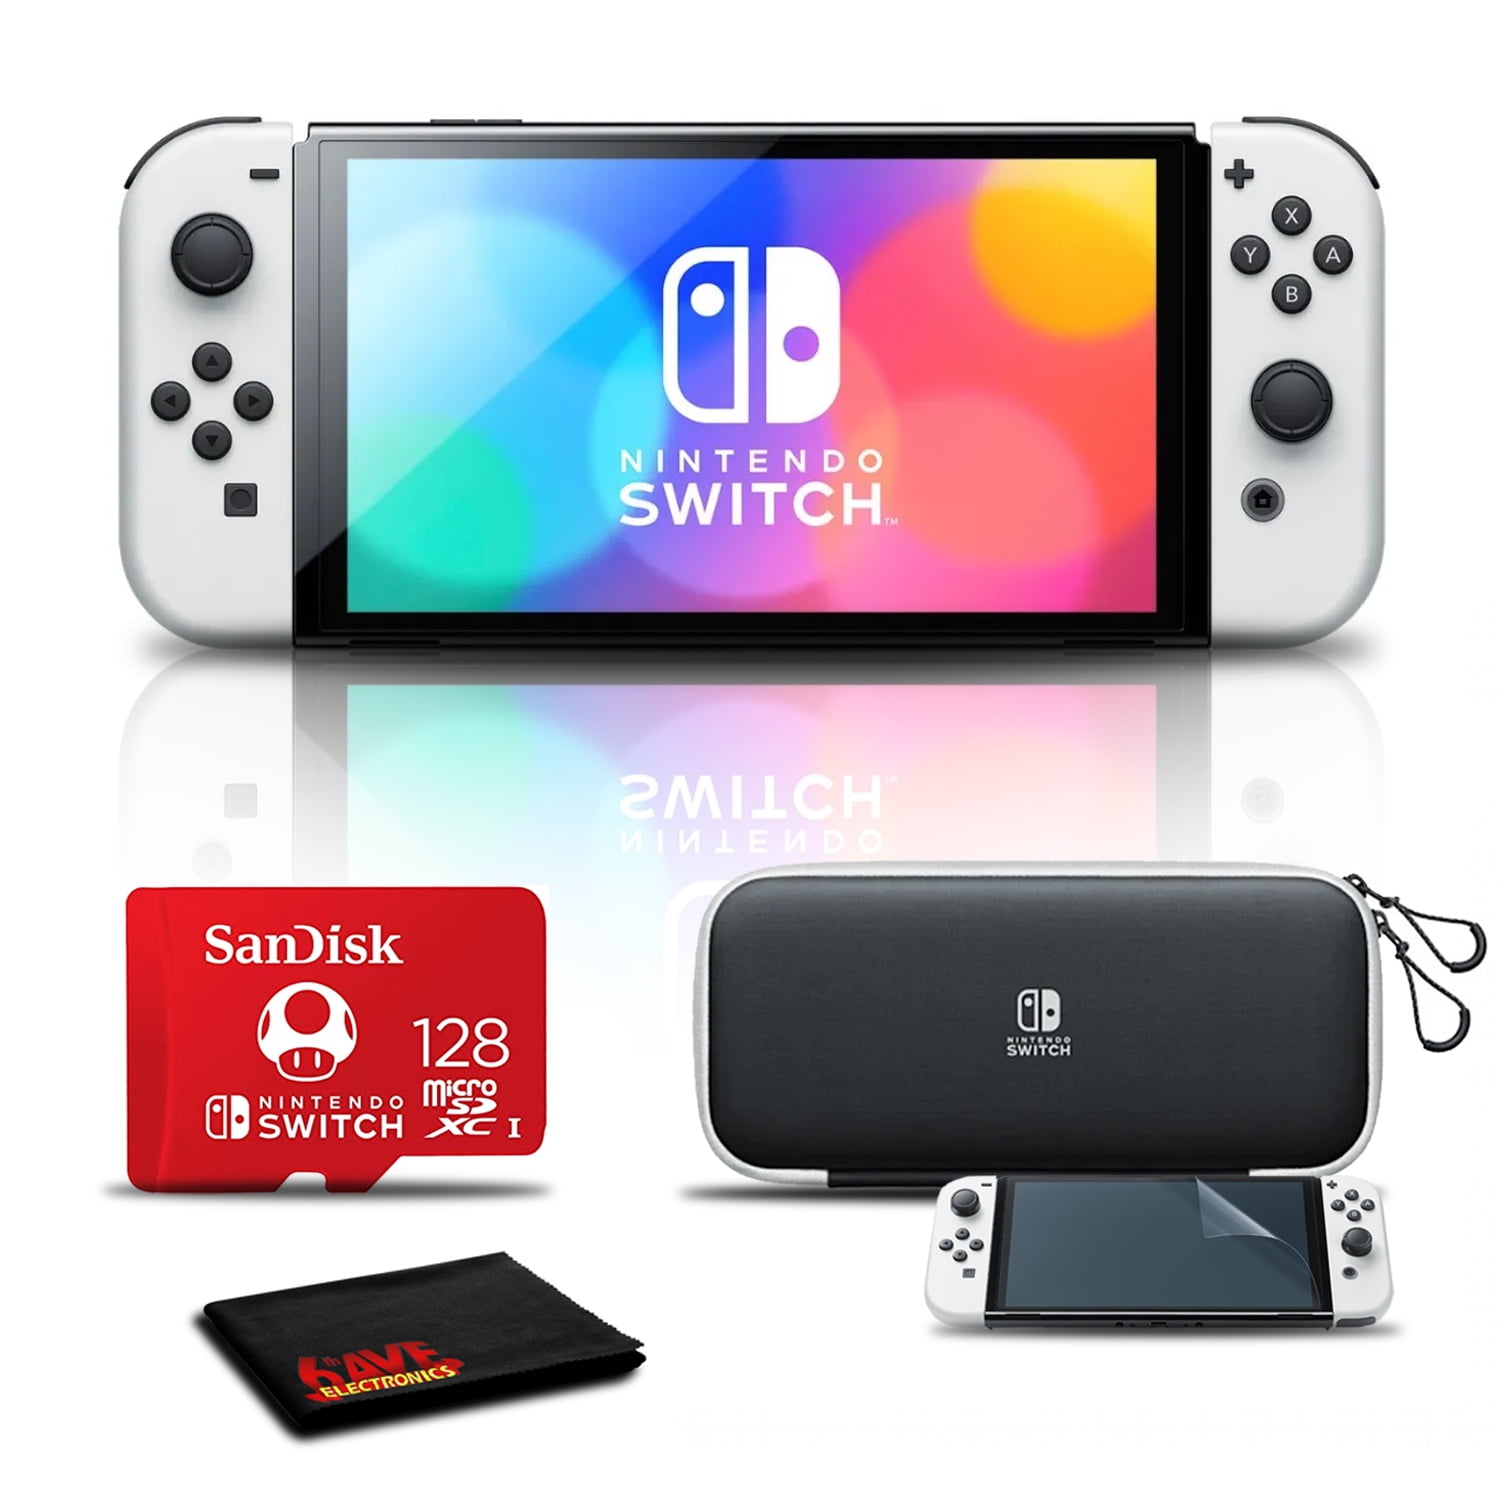 Nintendo Switch OLED White with 128GB Card, Carry Case, and More